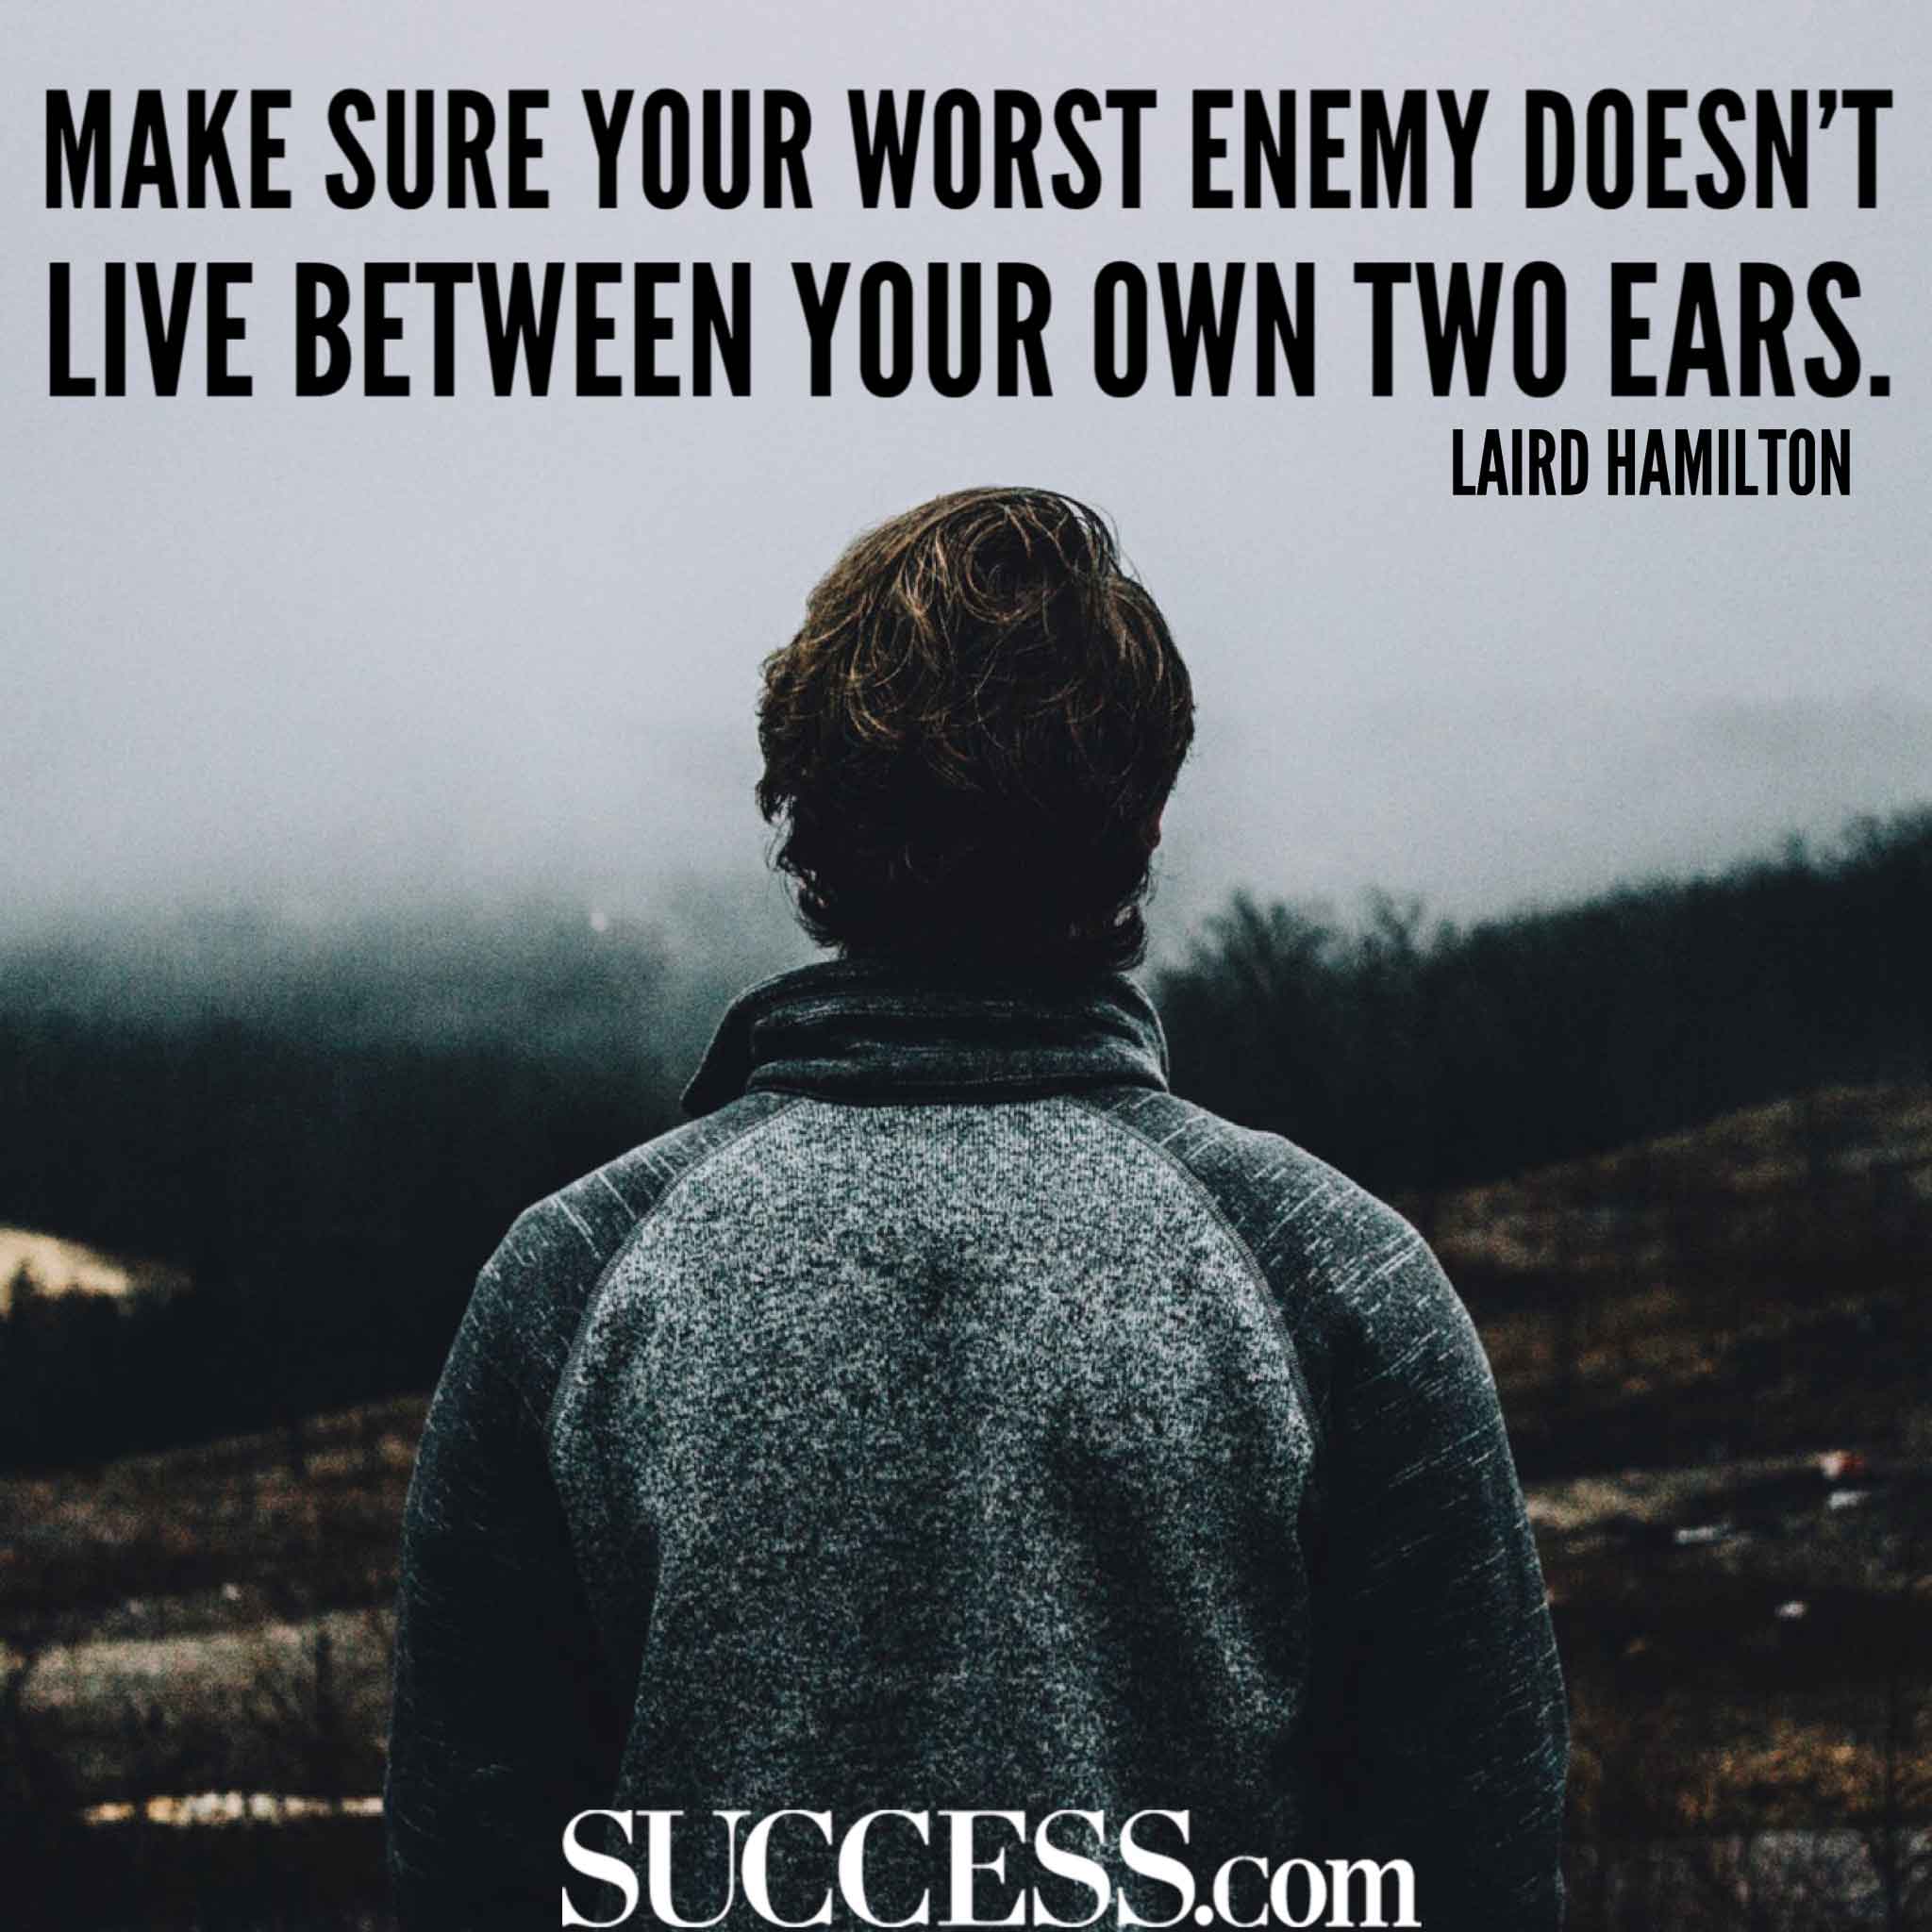 make sure your worst enemy doesn’t live between your own two ears. laird hamilton